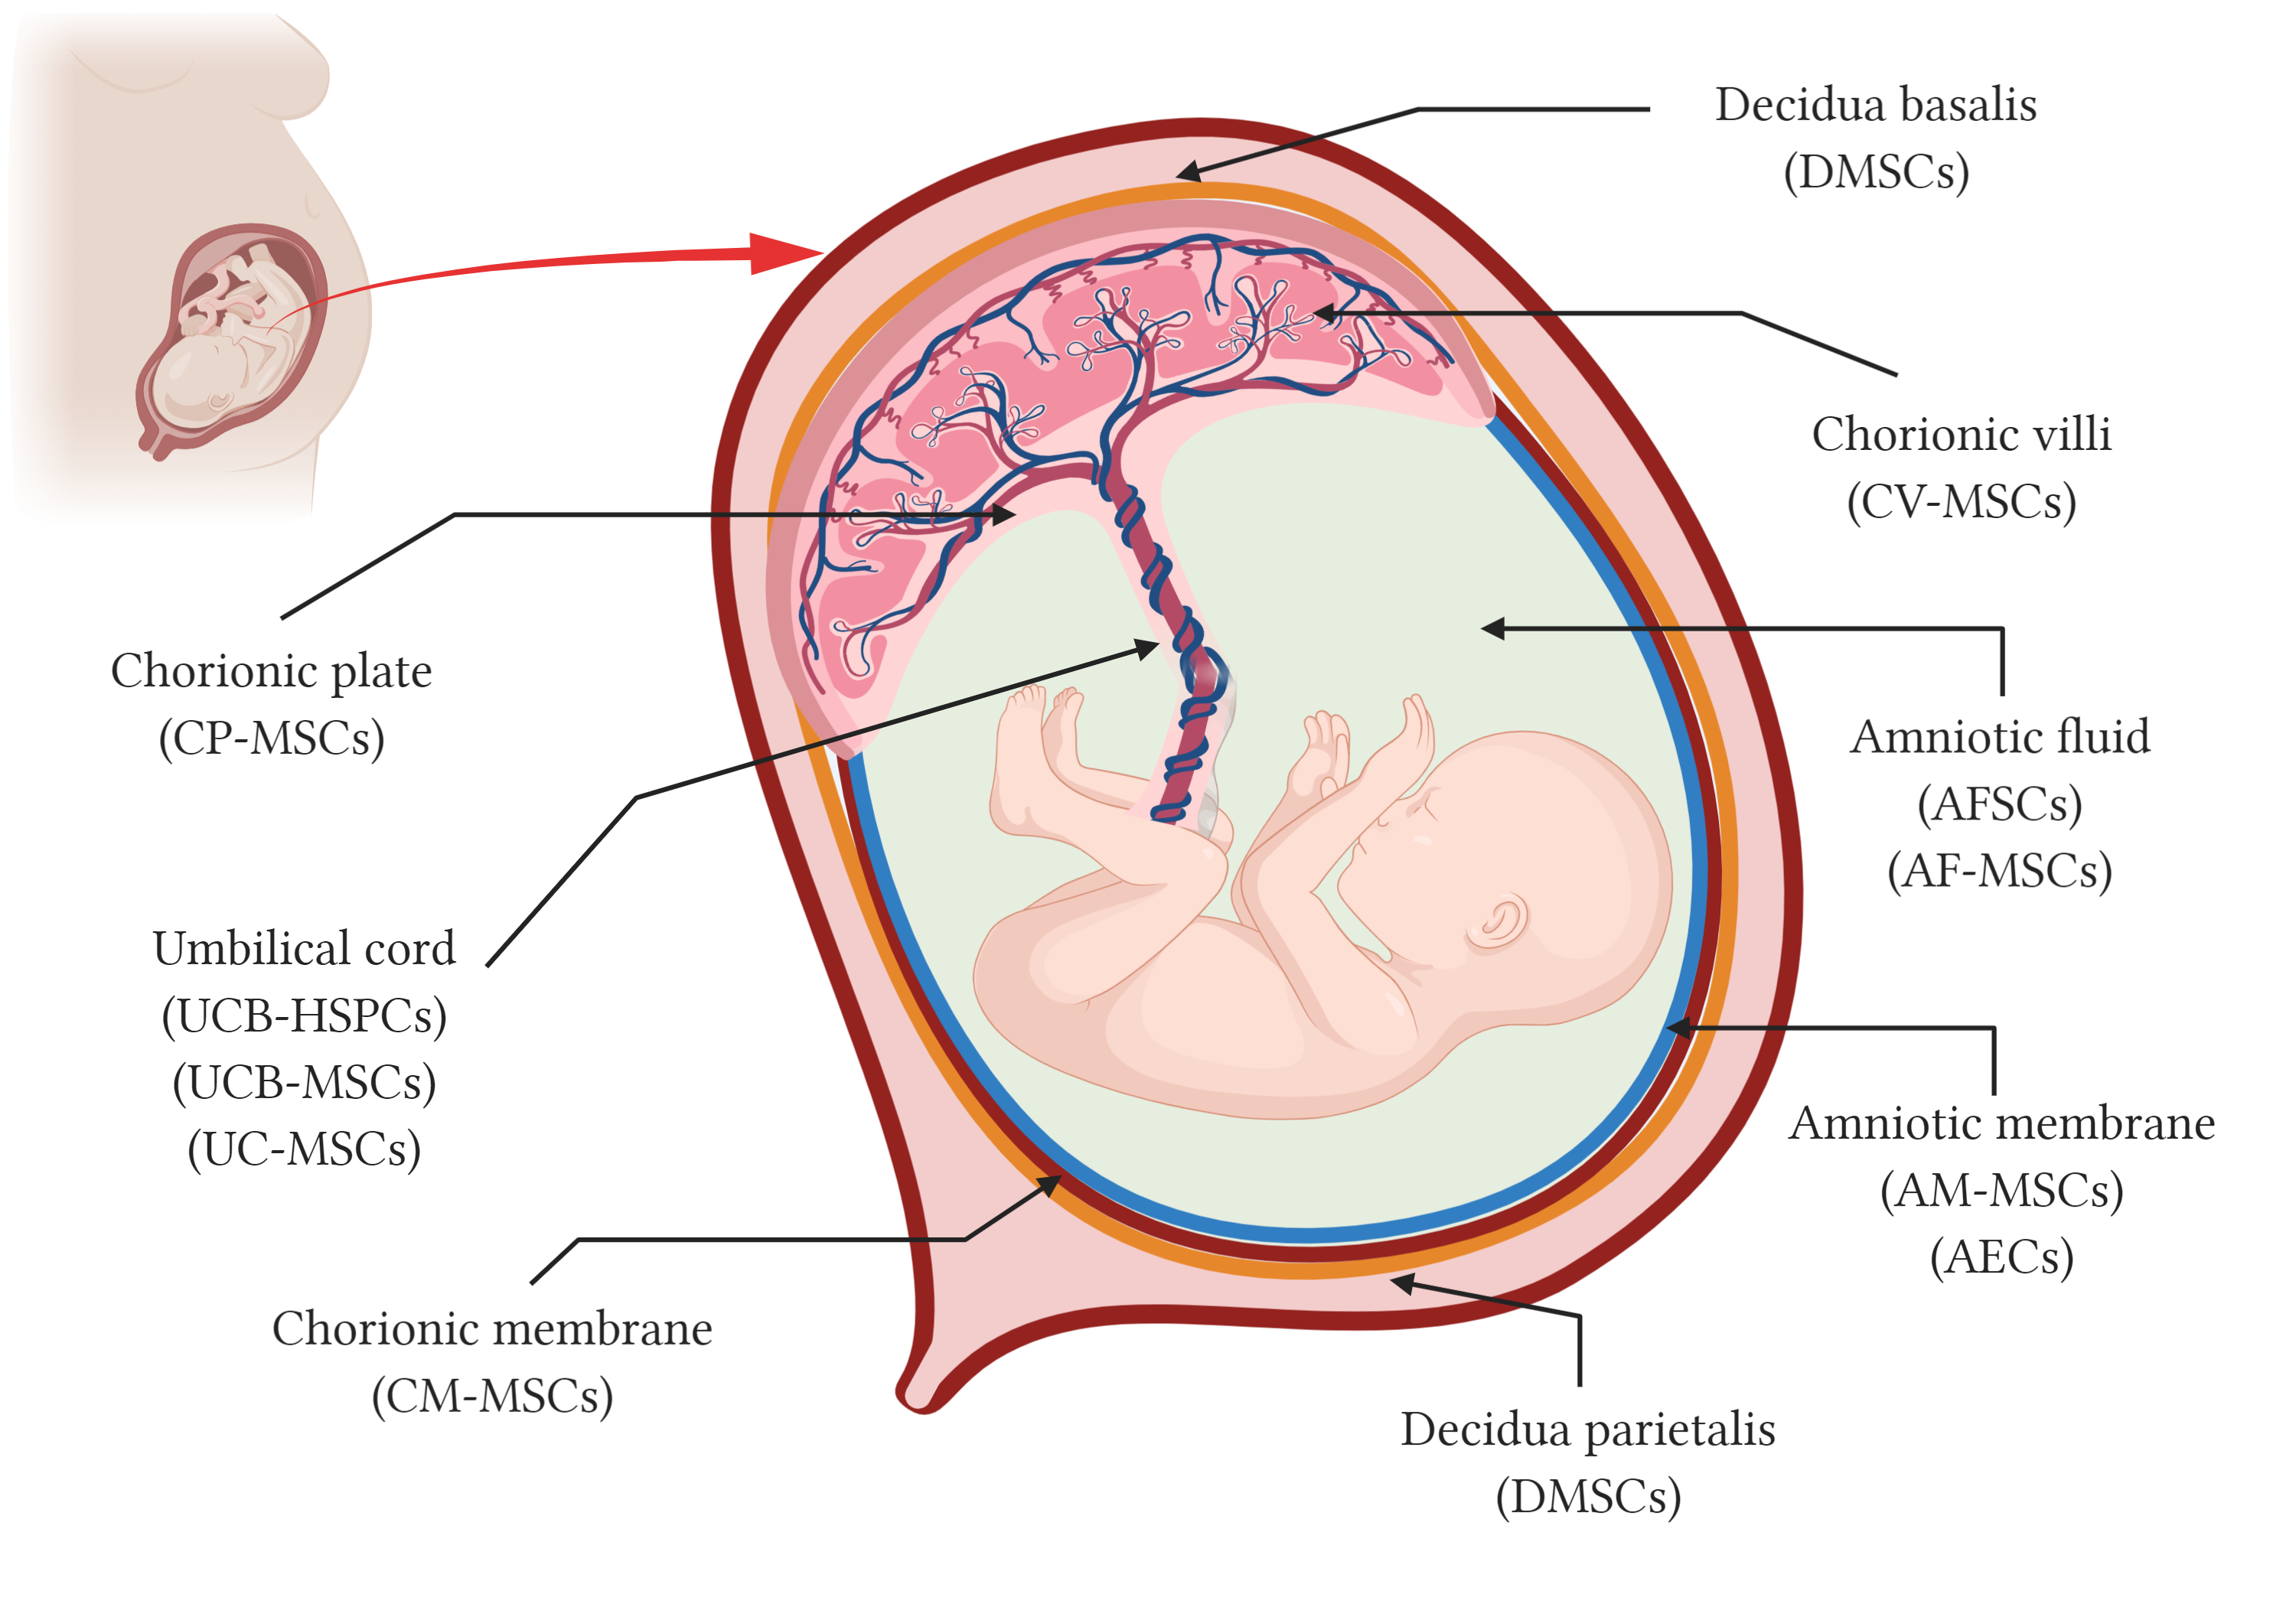 Figure 1. Schematic representation of perinatal tissues and perinatal stem cells. Anatomy of the human term placenta and its fetal annexes representing the main regions from which different types of perinatal stem cells have been isolated. AMSCs, amniotic membrane mesenchymal stromal cells; AEC, amniotic membrane epithelial cells; CMSCs, chorionic membrane mesen-chymal stromal cells; CP-MSCs, chorionic plate mesenchymal stem cells; CV-MSCs, chorionic villi mesenchymal stromal cells; AFC, amniotic fluid cells; AFSC, amniotic fluid stem cells; AF-MSC, amniotic fluid mesenchymal stromal cells; UCB-HSPC, umbilical cord blood hematopoietic stem/progenitor cells; UCB-MSC, umbilical cord blood mesenchymal stromal cells; UC-MSCs, umbilical cord mesenchymal stromal cells; and DMSC, decidua-derived mesenchymal stromal cells. Created with BioRender.com.